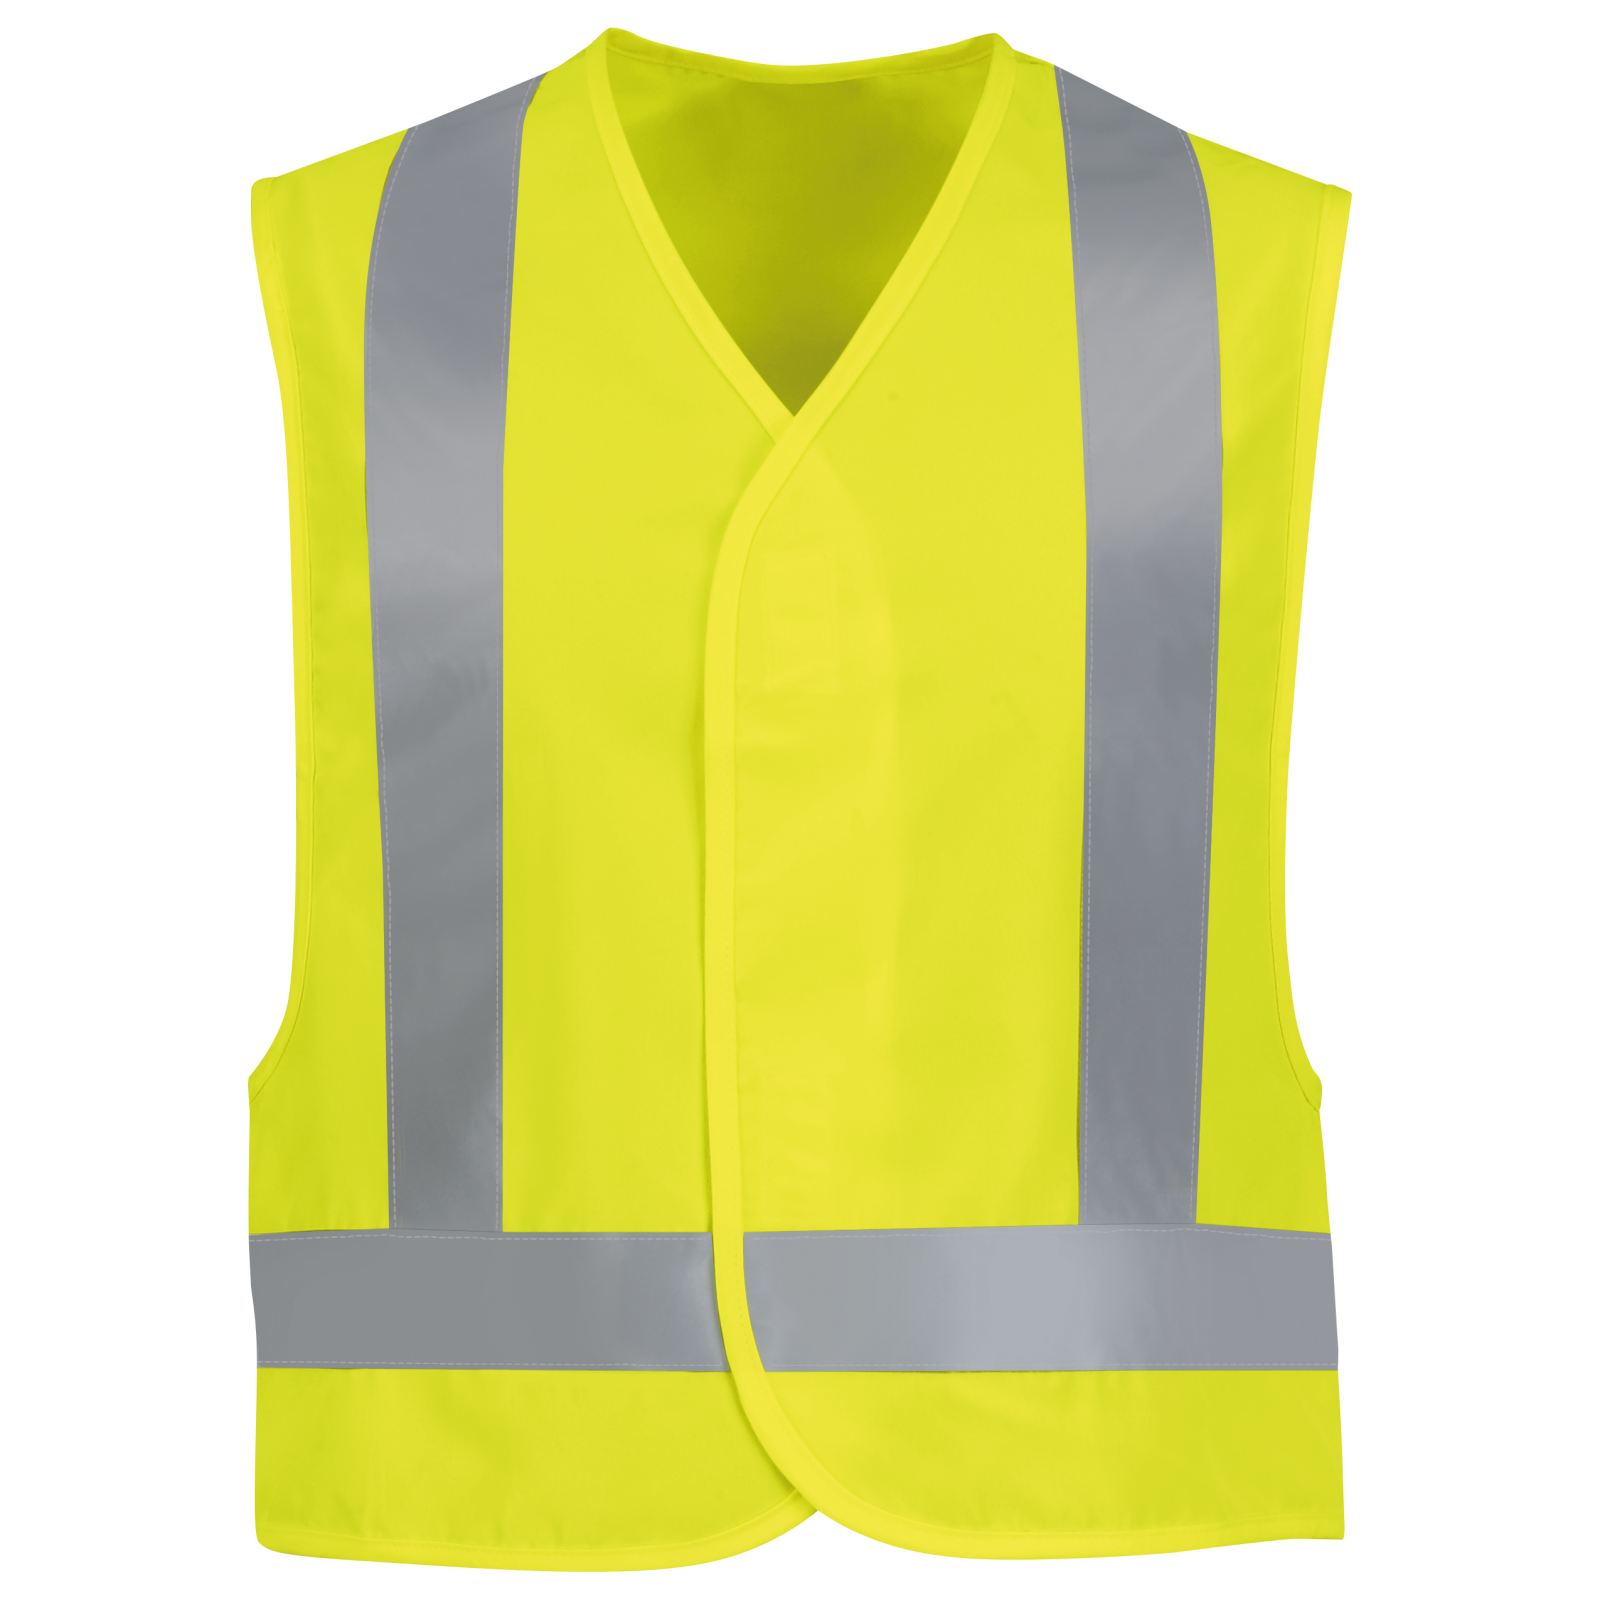 Dib Safety Vest Reflective ANSI Class 2 High Visibility Vest with Pockets  and Zipper Construction Work Vest Hi Vis Yellow S  Amazonin Industrial   Scientific